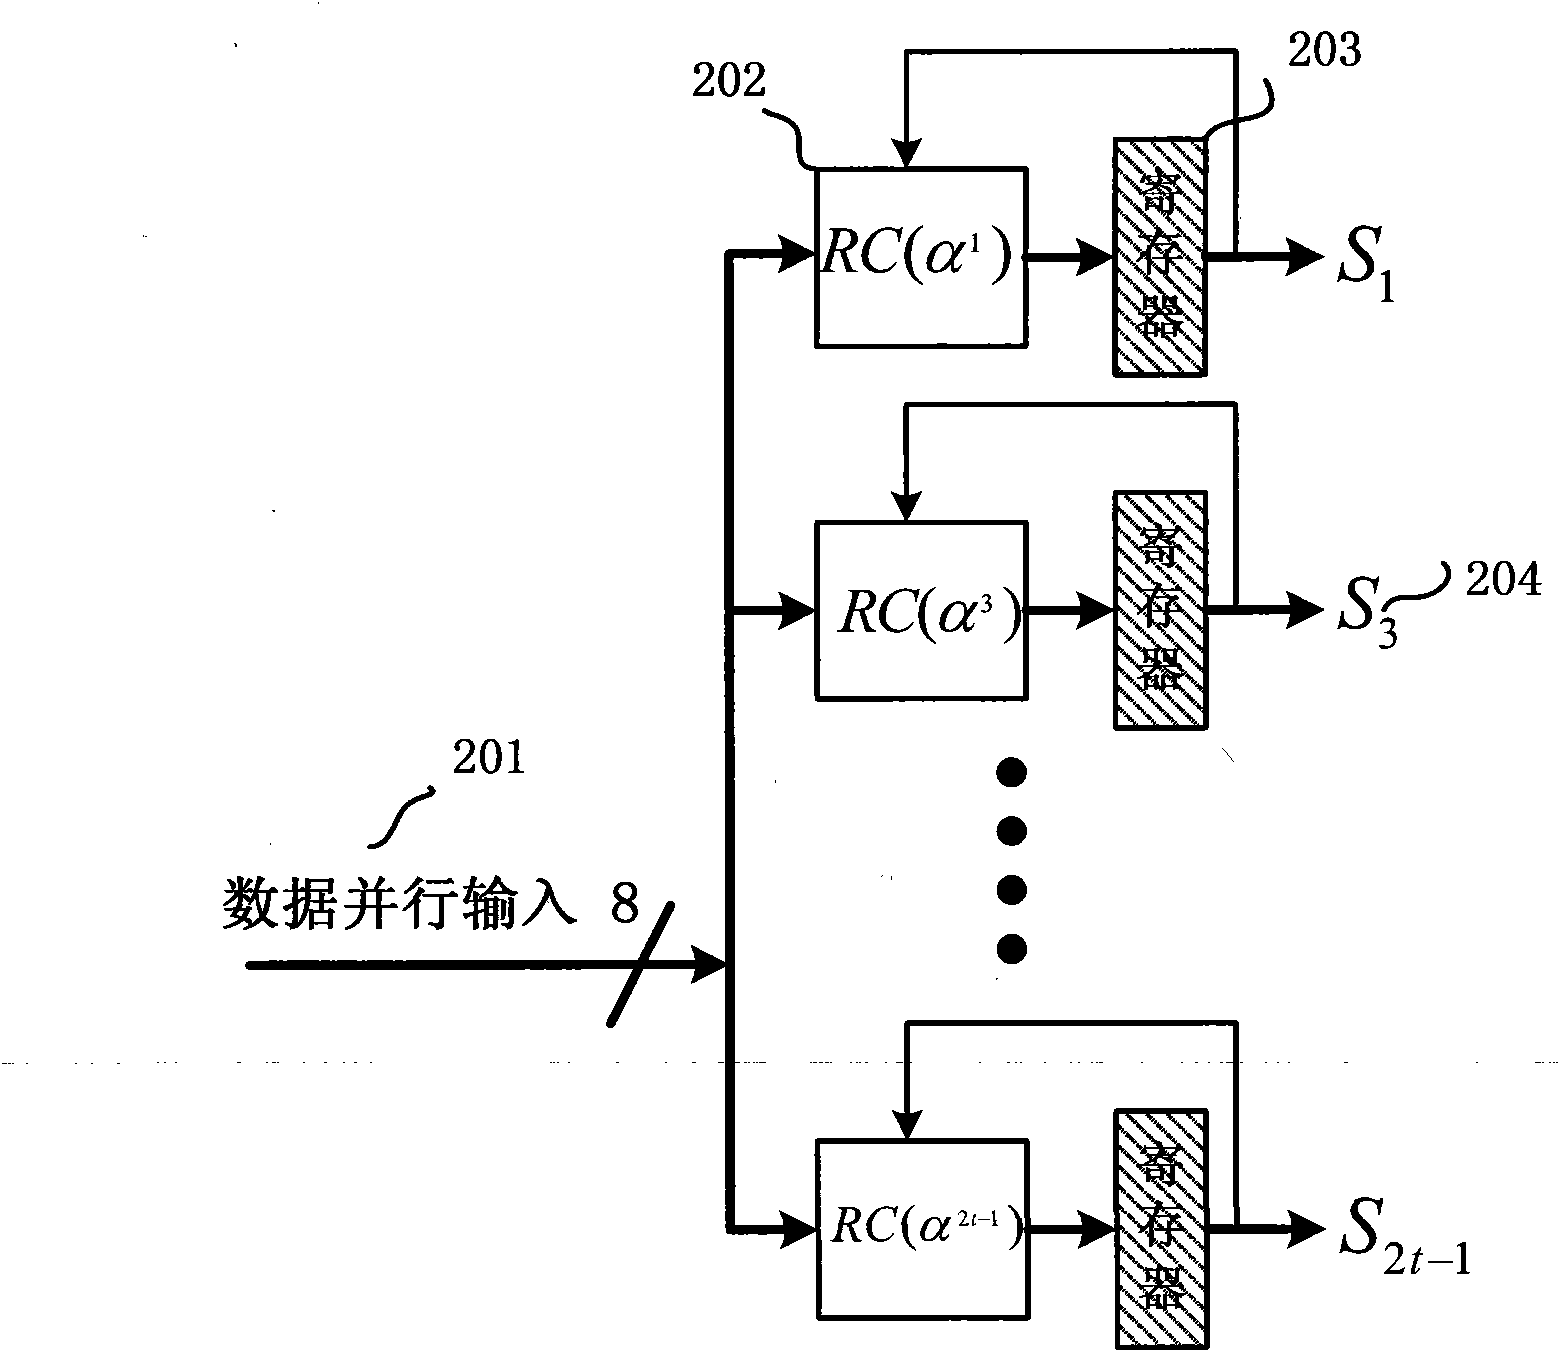 High-speed and low-delay Berlekamp-Massey iteration decoding circuit for broadcast channel (BCH) decoder